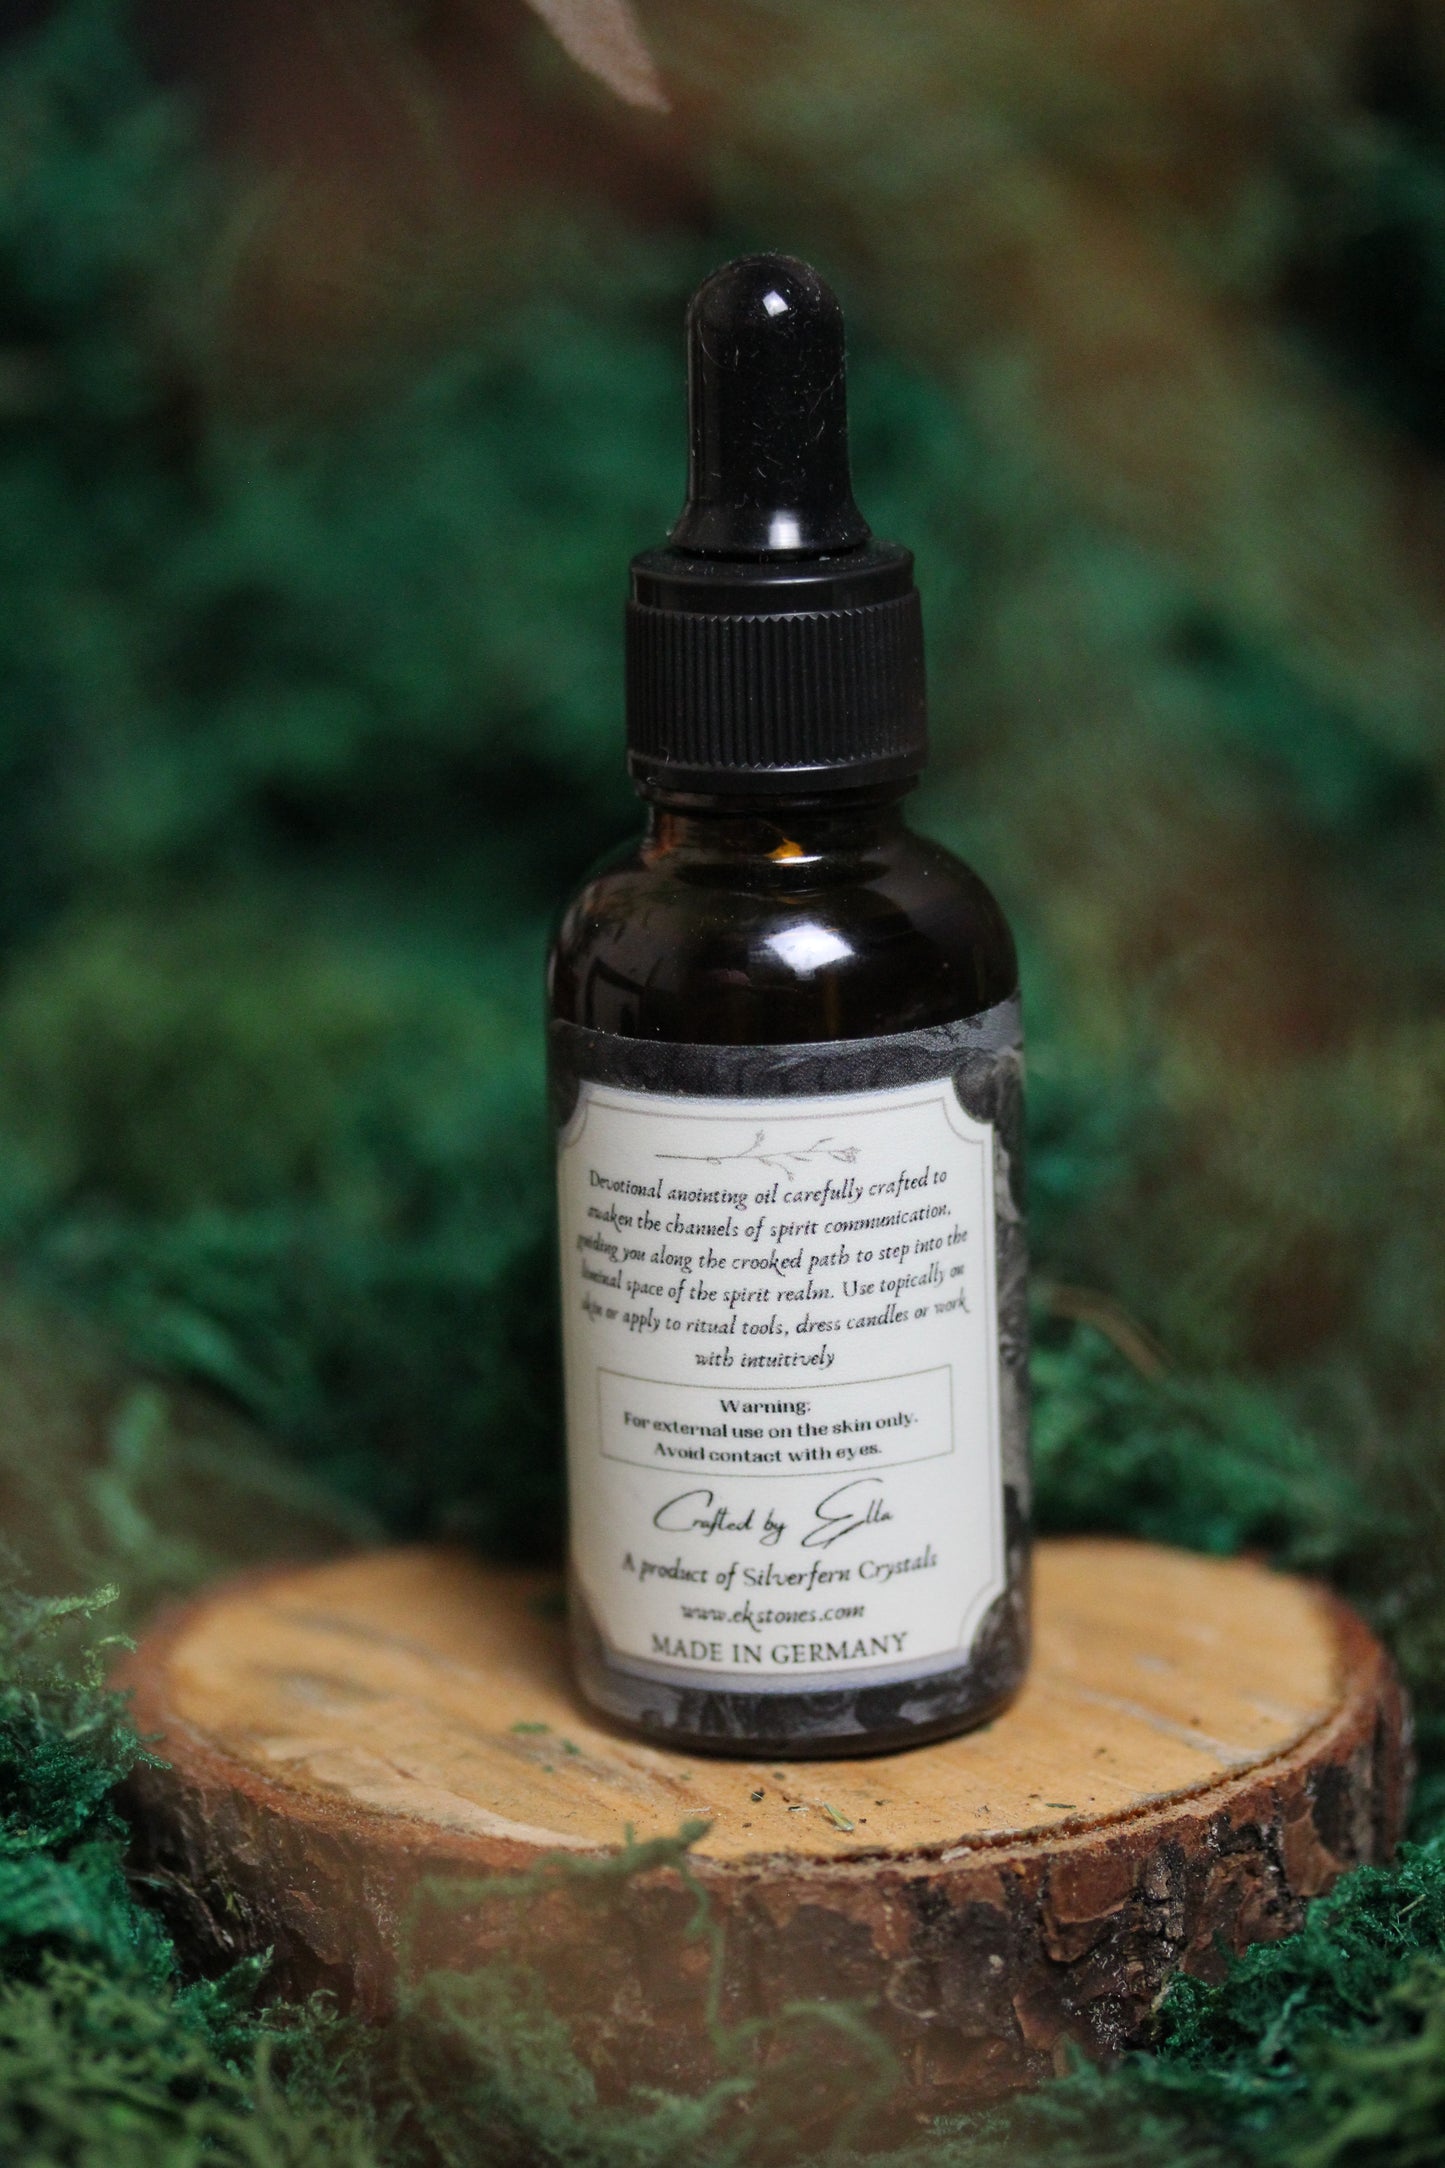 Liminal Anointing Oil